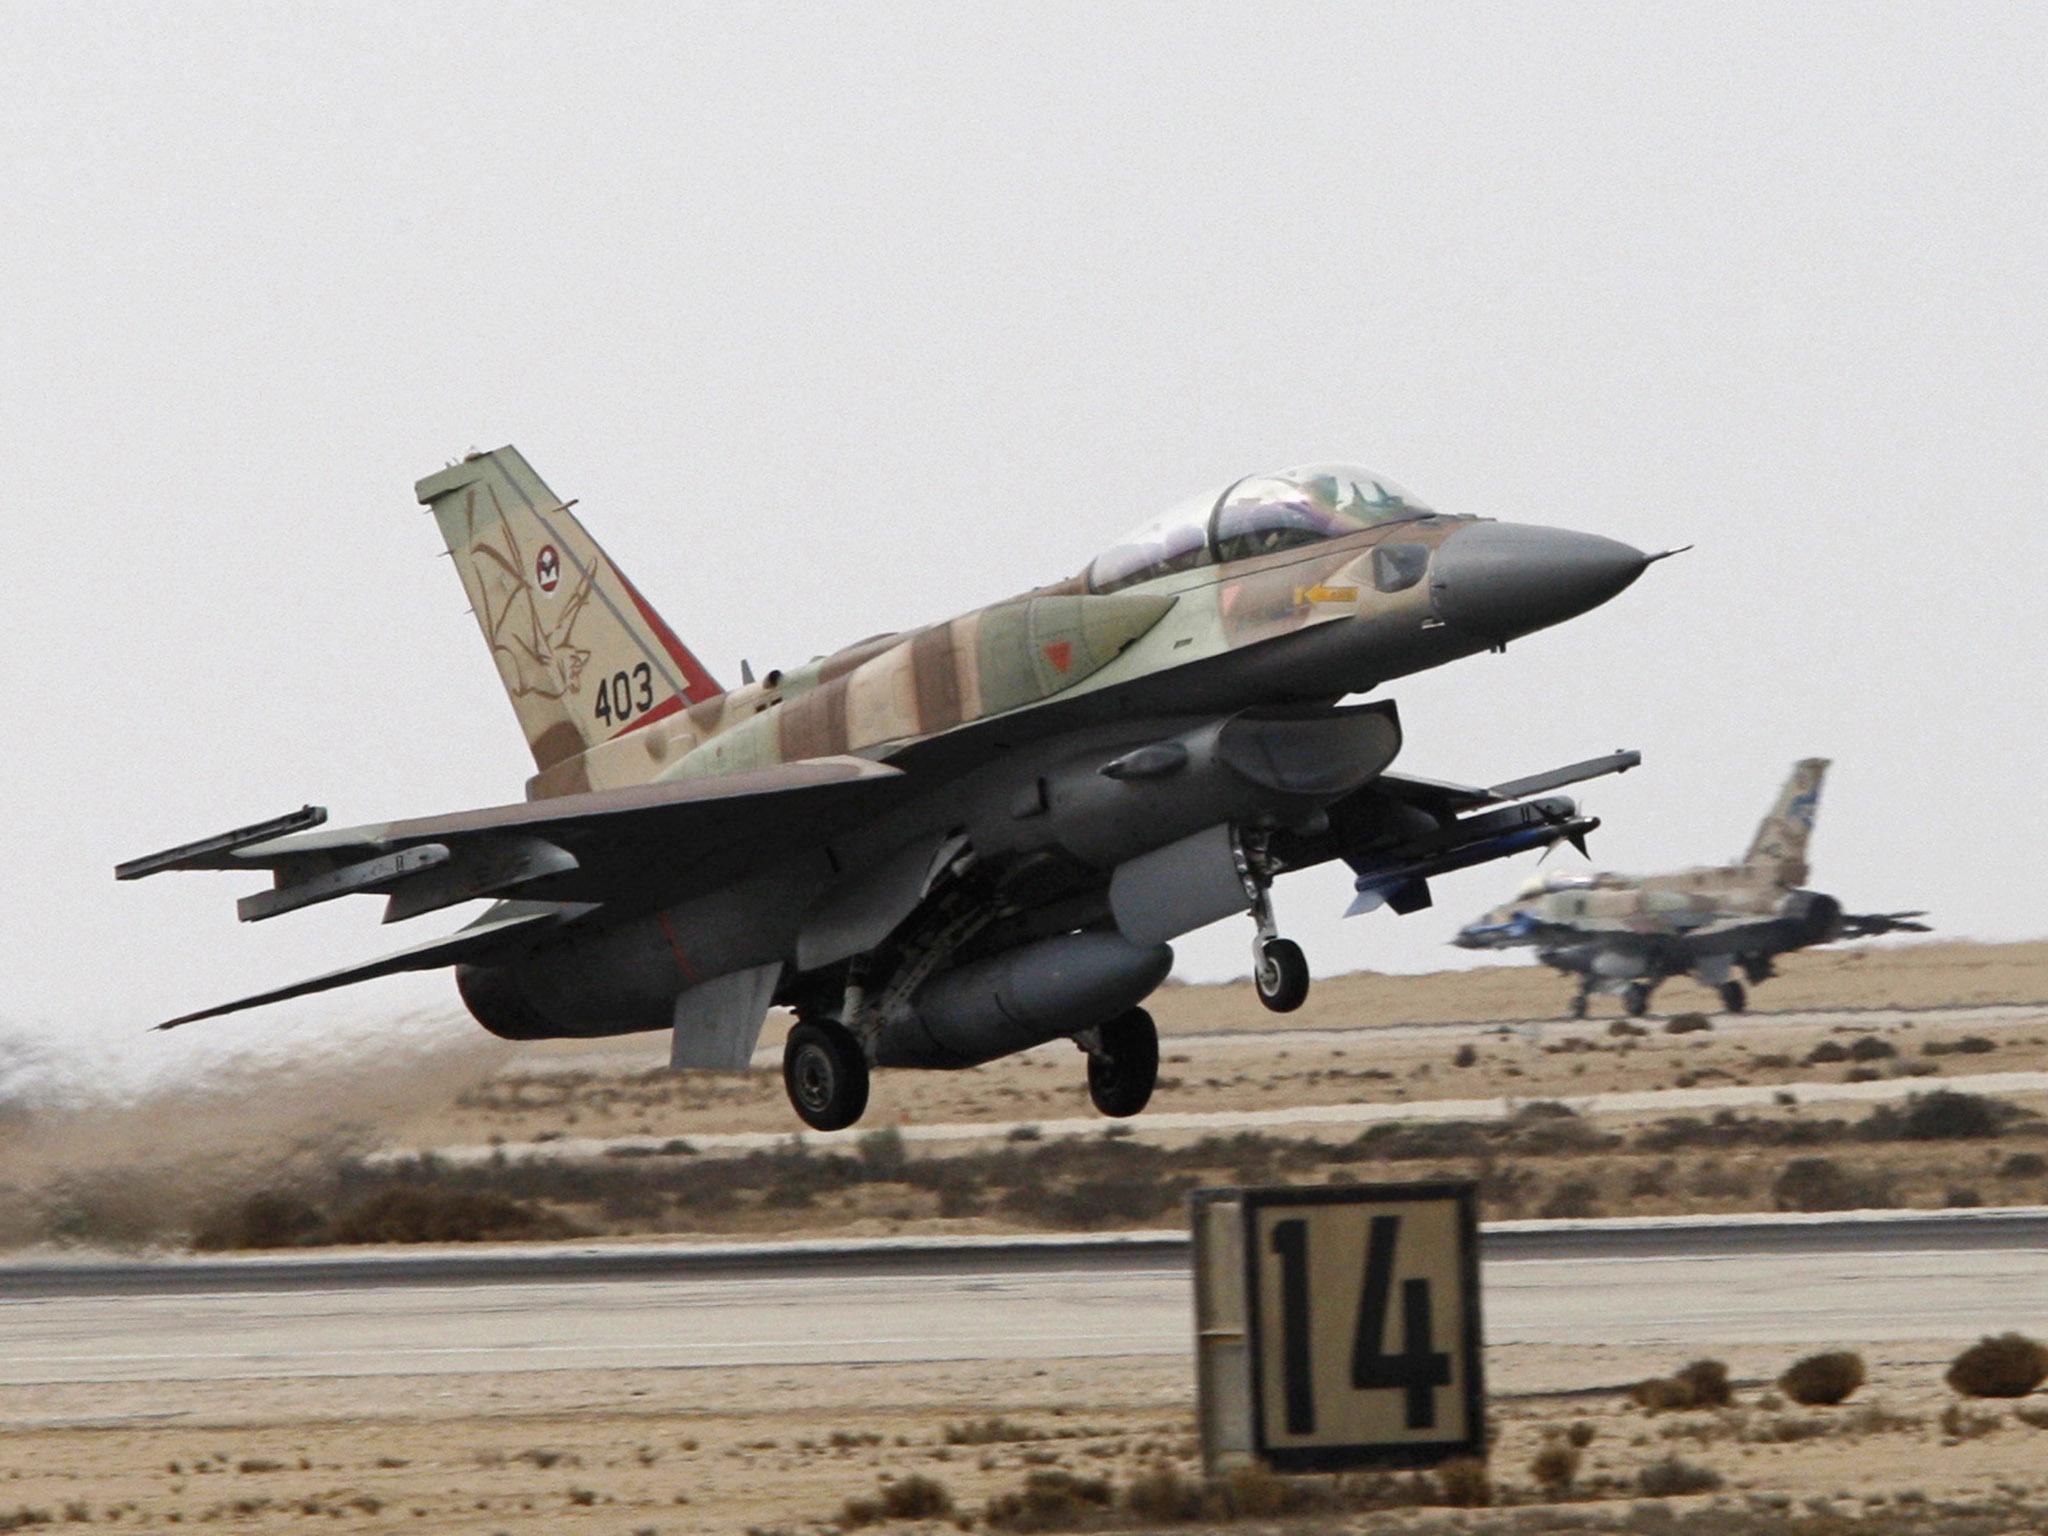 The Israeli F-16I jet burst into flames and crashed on its descent into Ramon air force base